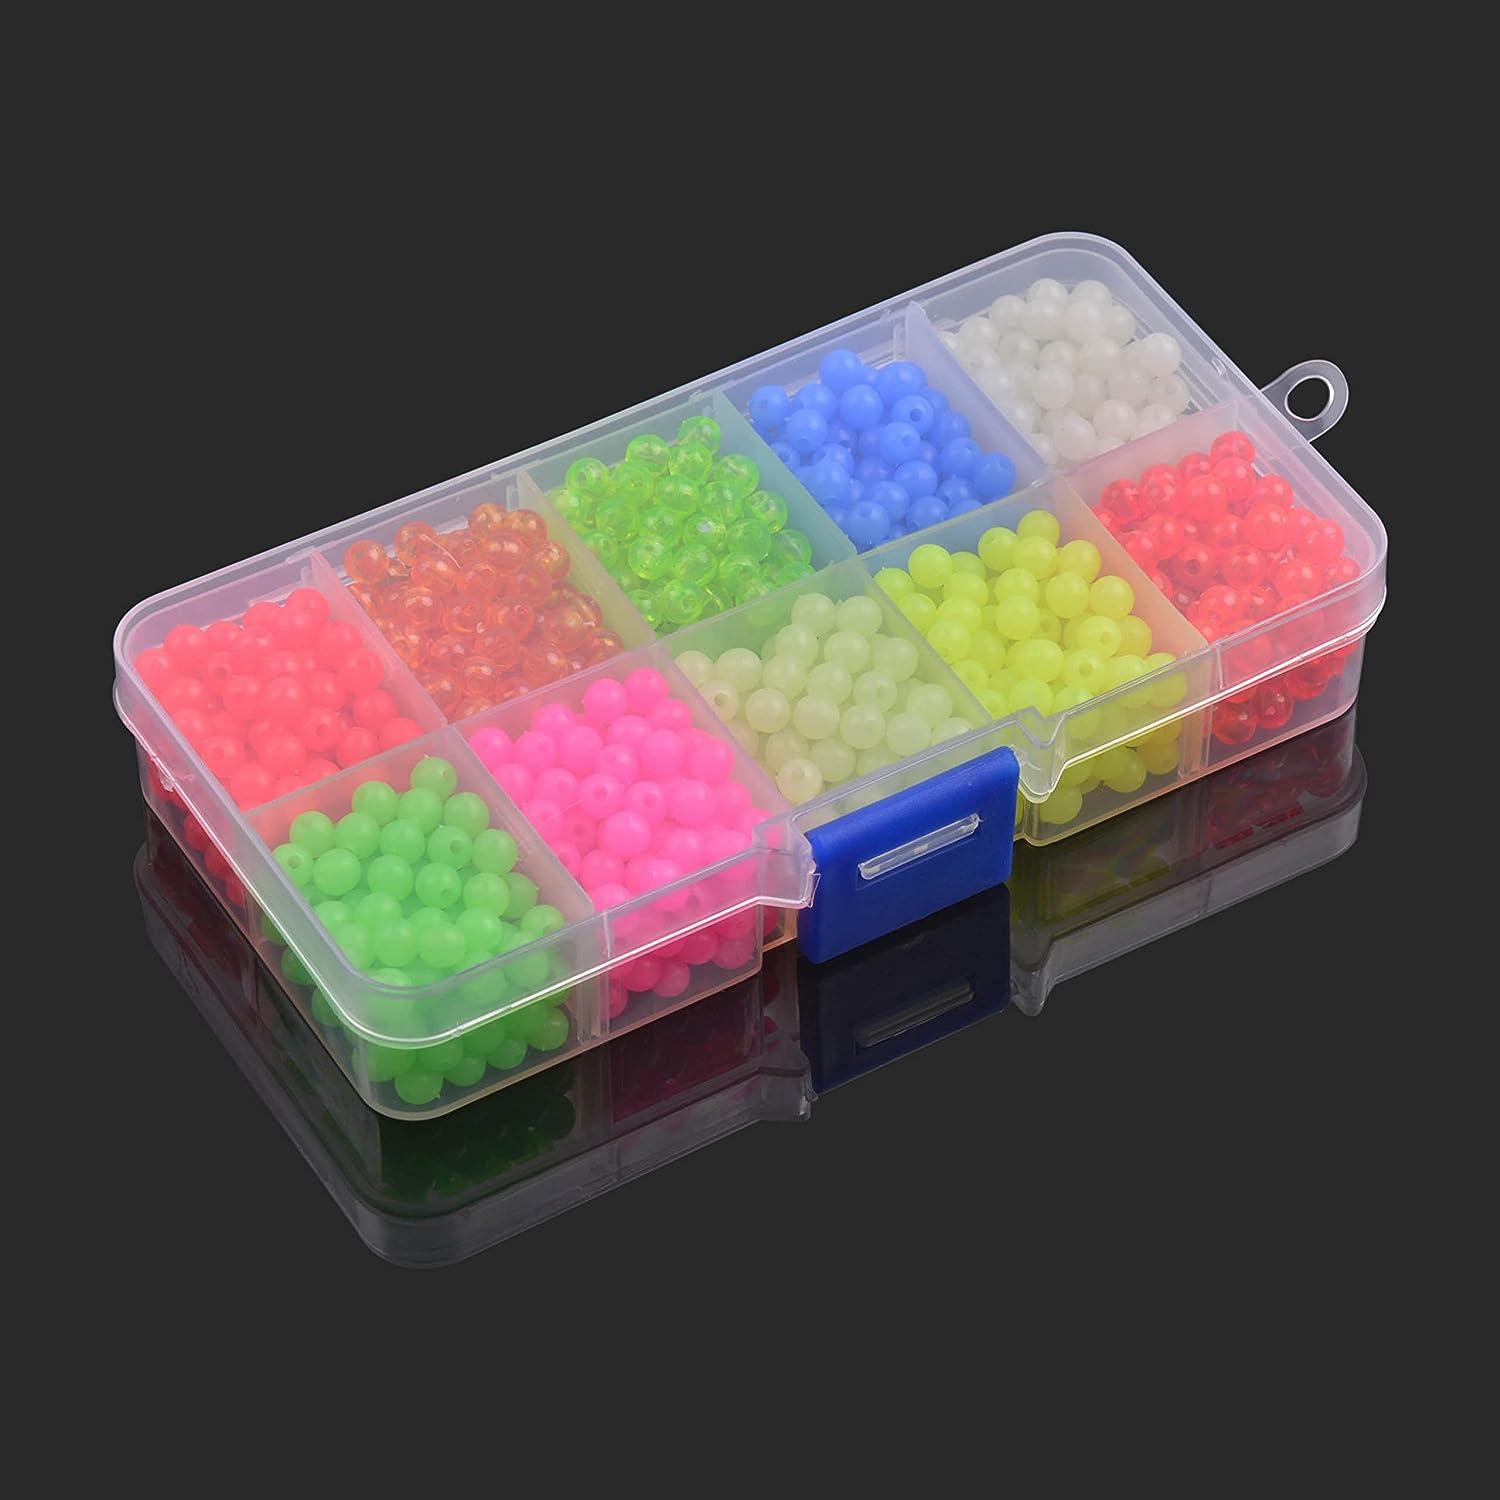 fishing glow beads, fishing glow beads Suppliers and Manufacturers at